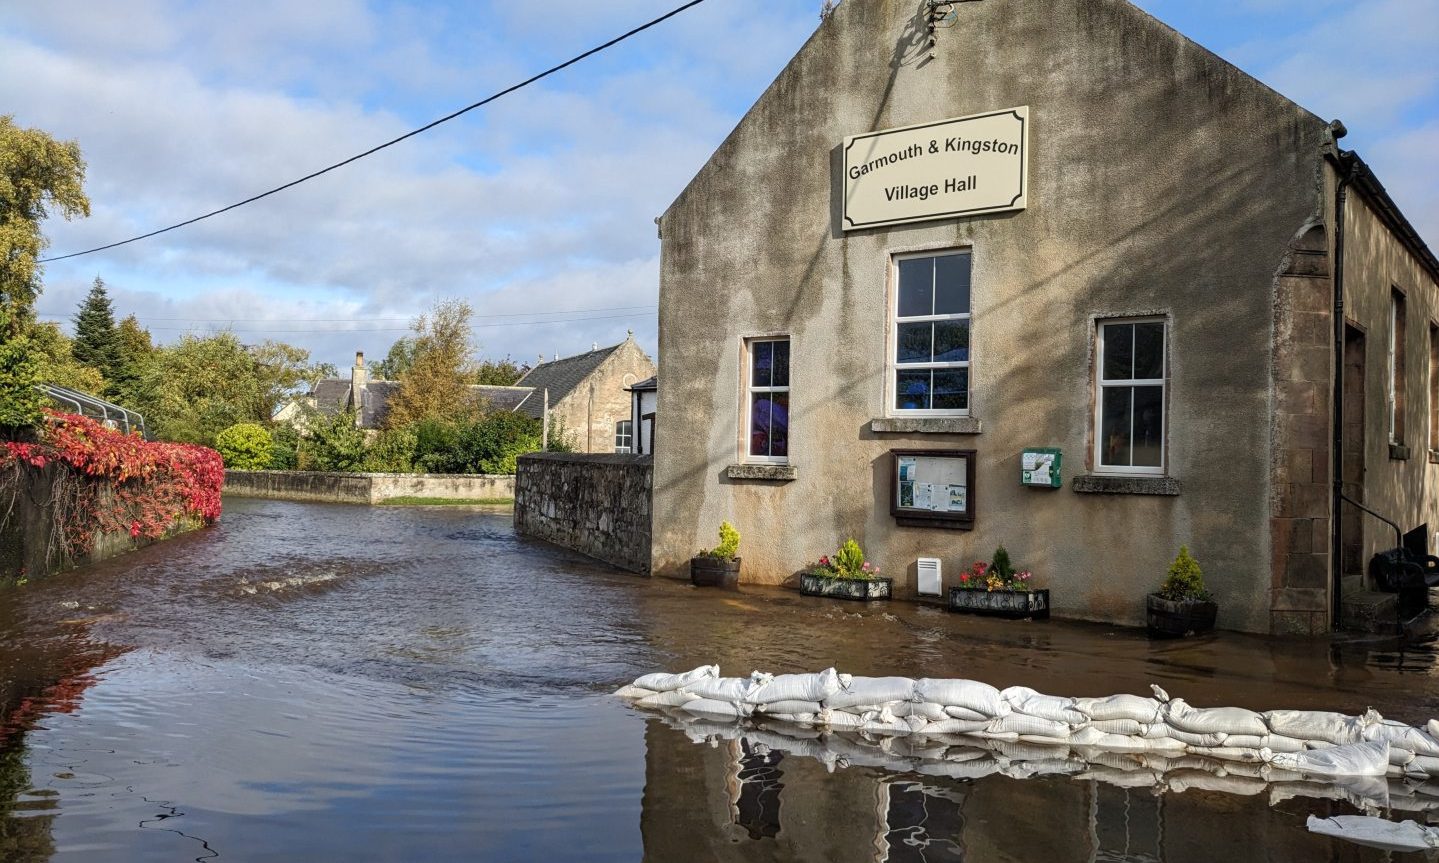 Garmouth Village Hall surrounded by water with sandbags in foreground. 